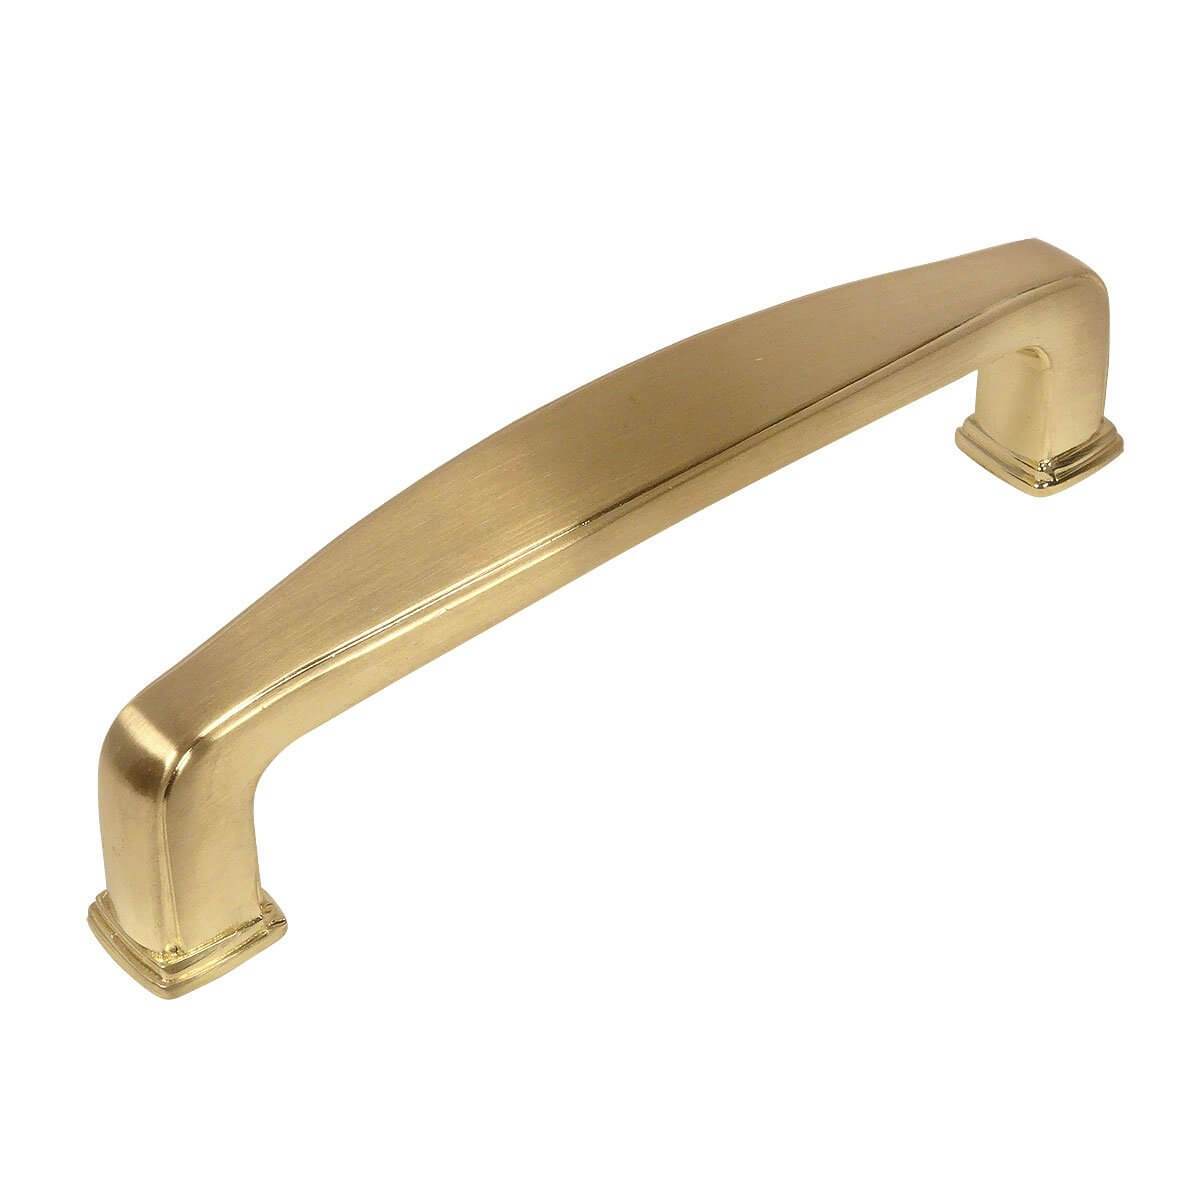 Cabinet pull with a wide shape in the centre with brushed brass finish and three and a half inch hole spacing